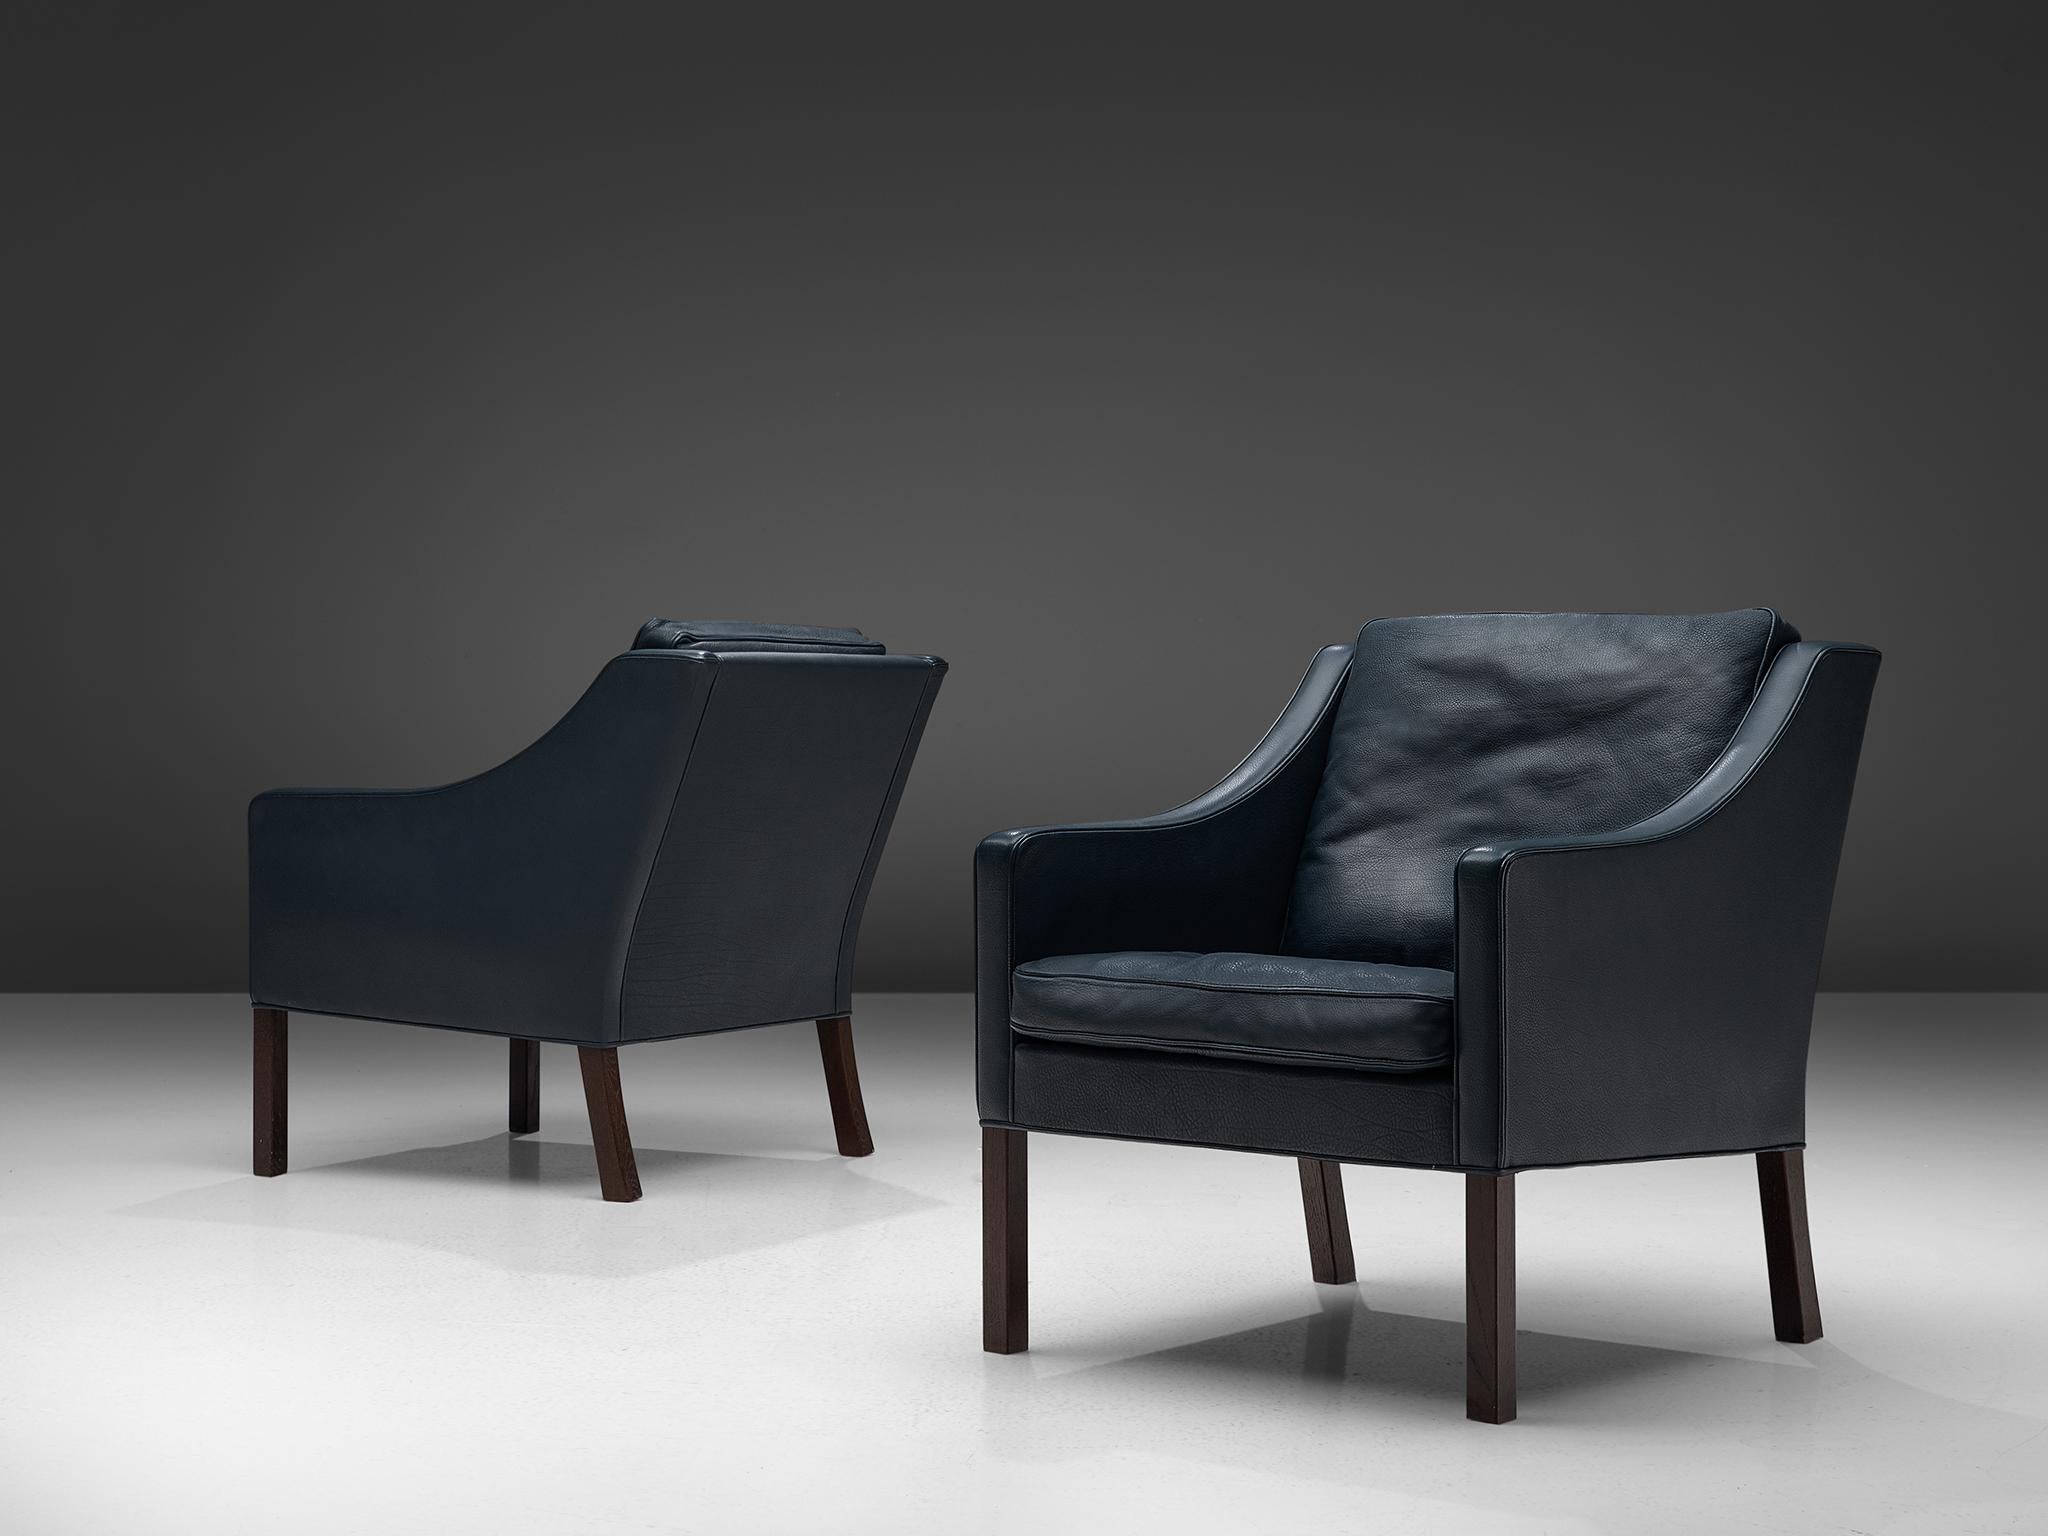 Børge Mogensen for Fredericia Møbelfrabirk, pair of '2207' lounge chairs, leather and stained beech, Denmark, design 1963.

Comfortable set of two lounge chairs with an elegant design by Børge Mogensen. These armchairs have a low, curved back,